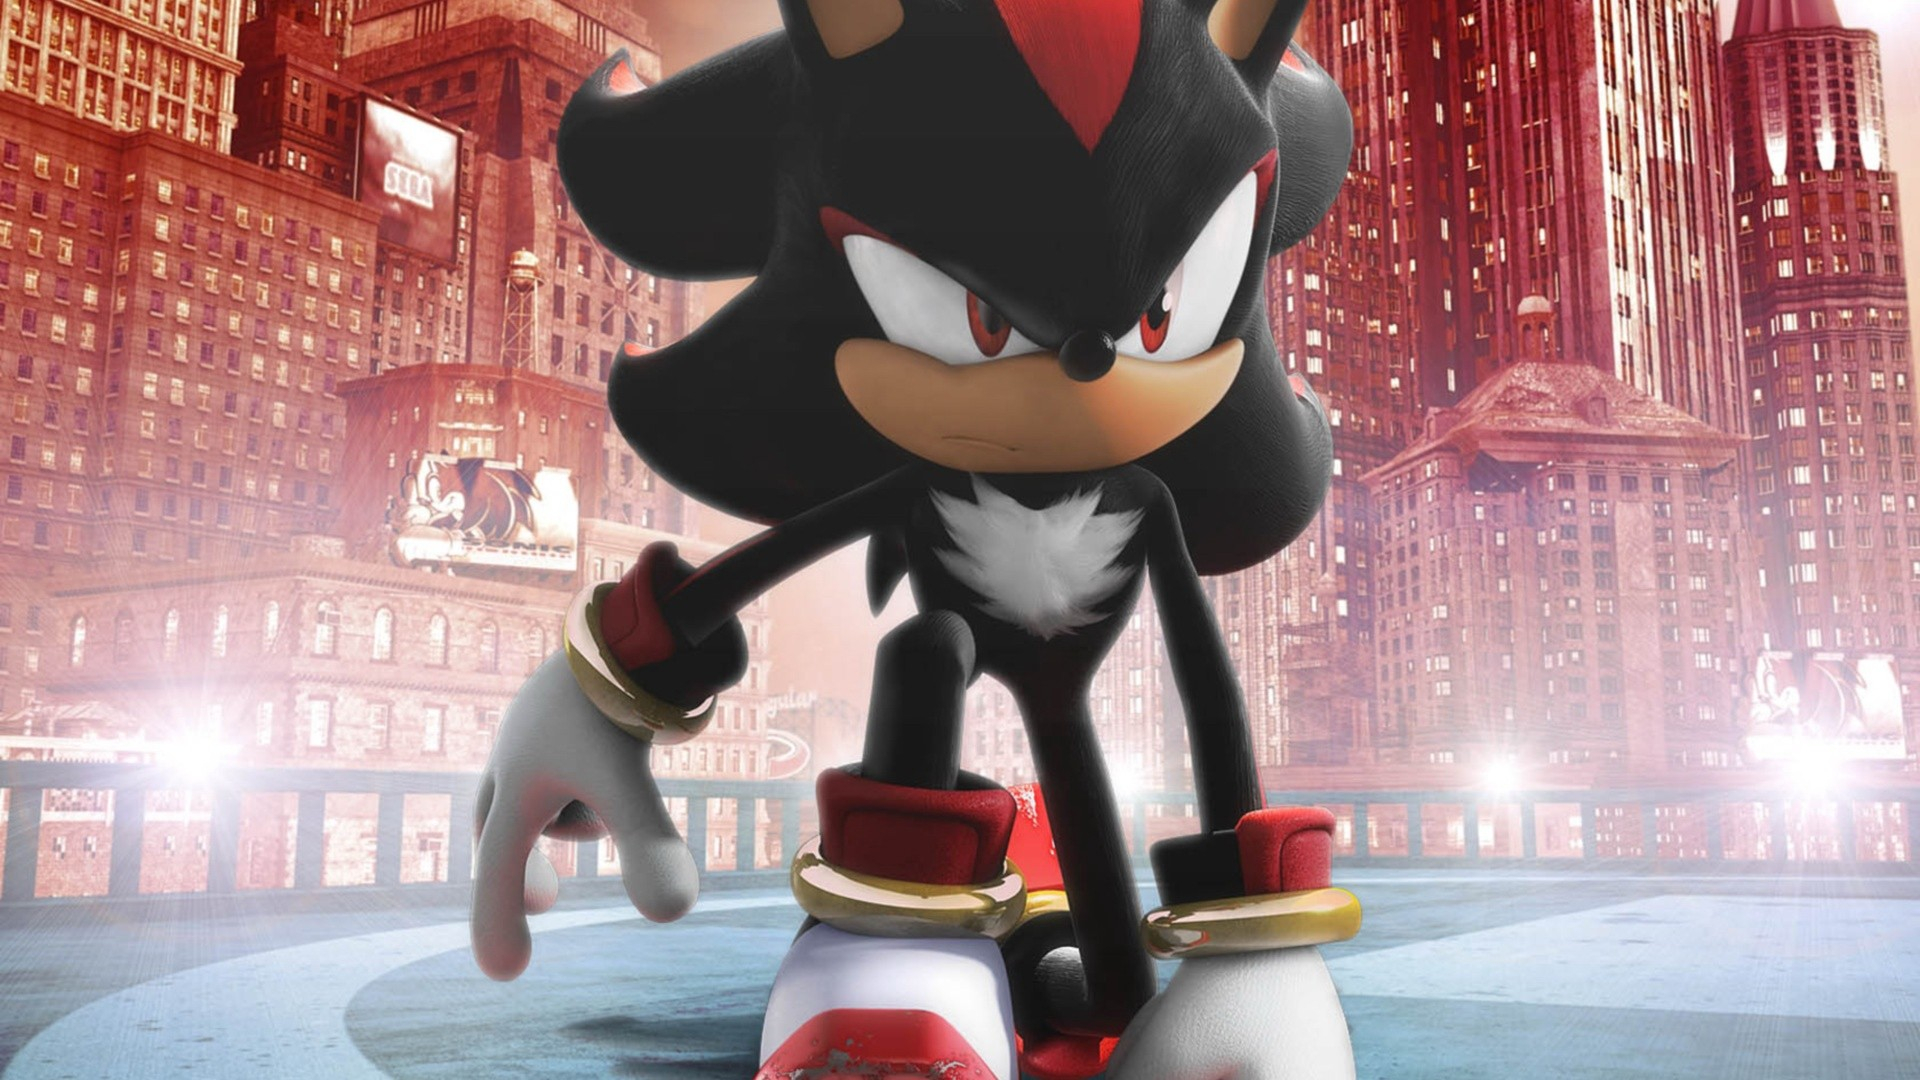 1920x1080 20+ Shadow the Hedgehog HD Wallpapers and Backgrounds